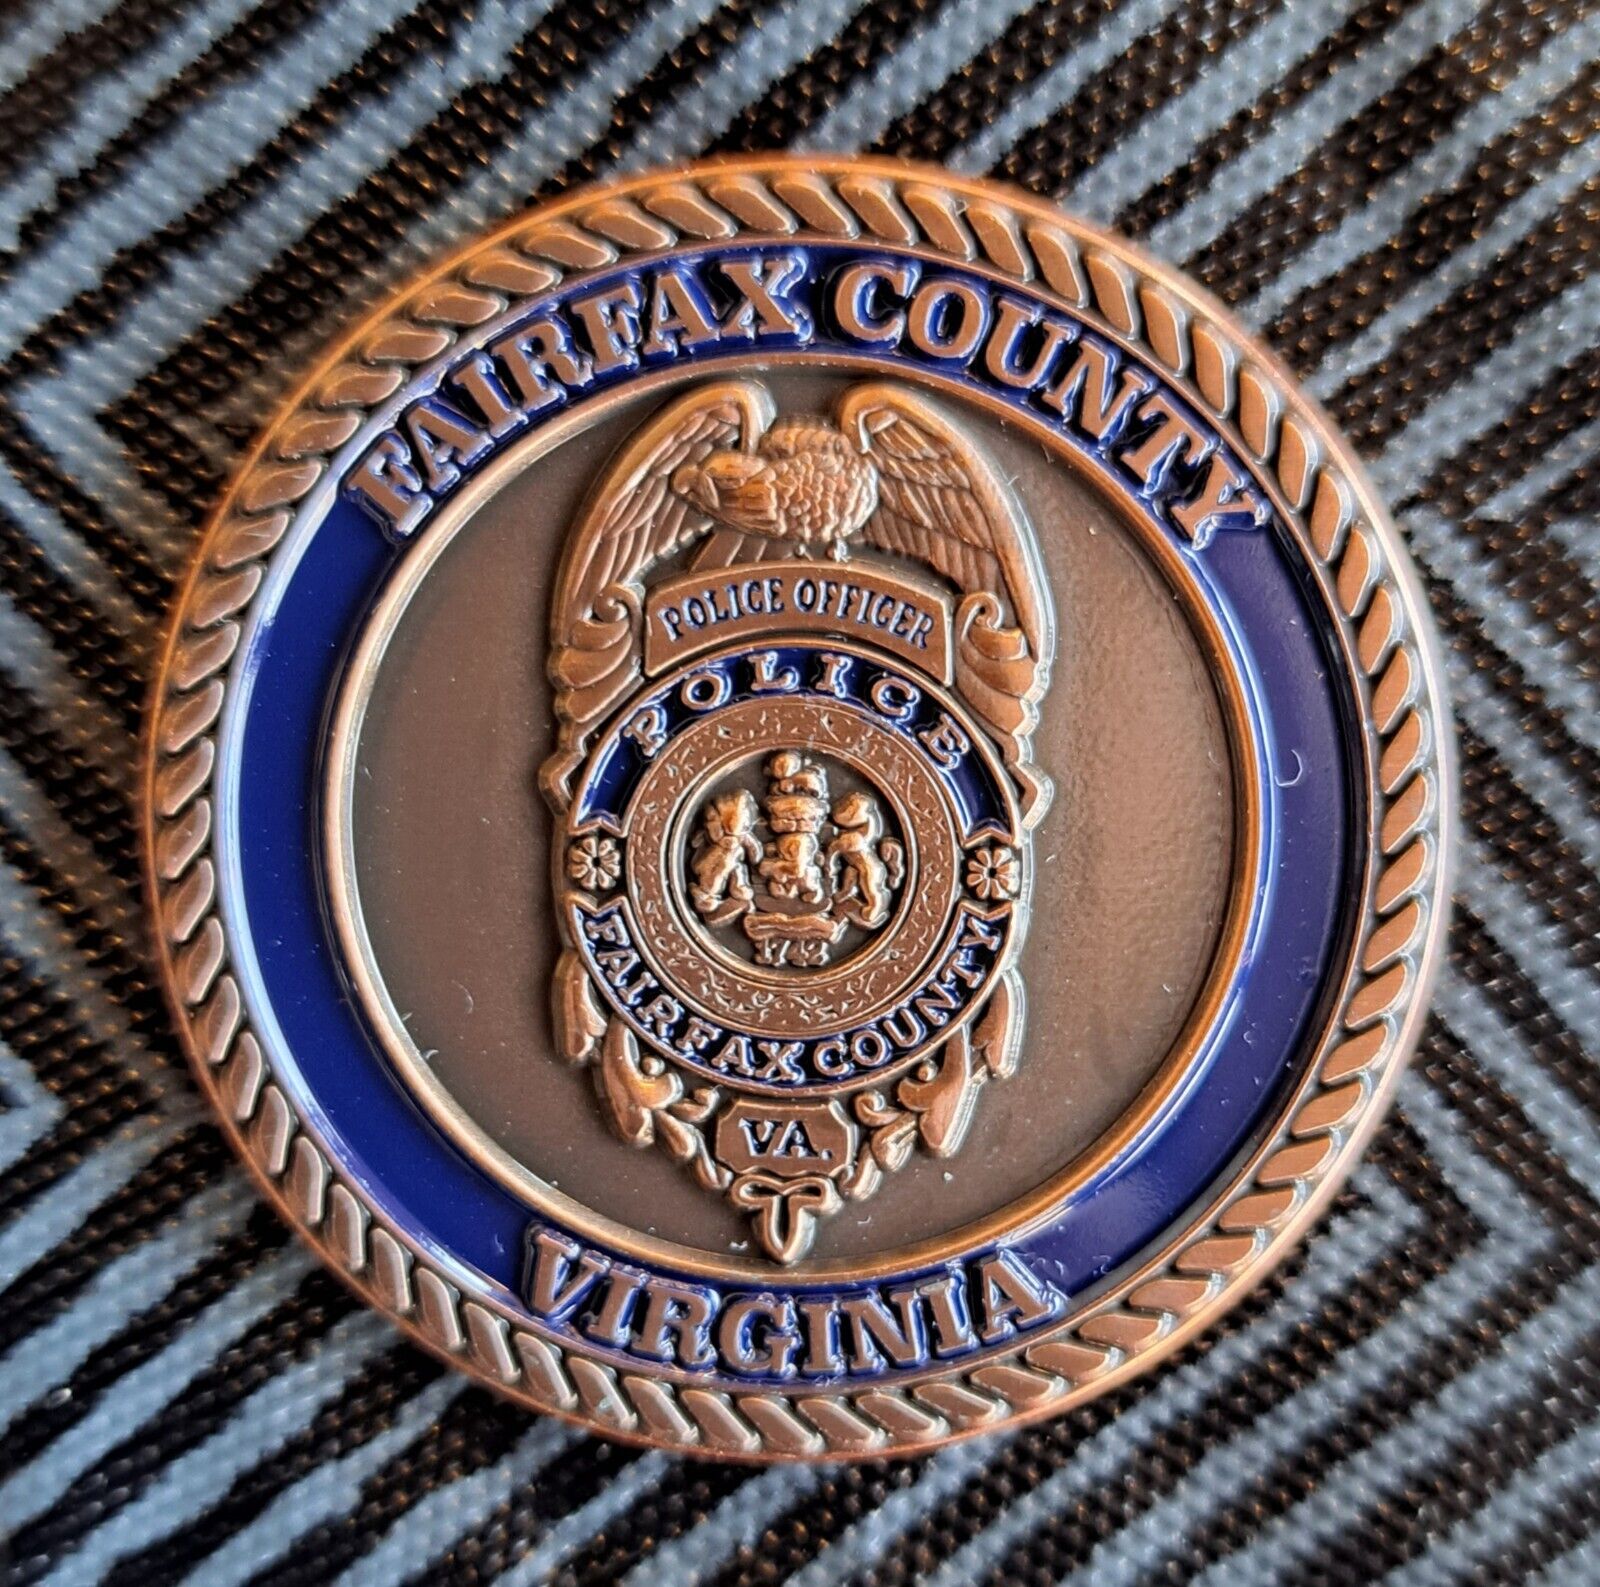 Fairfax County Police Challenge Coin - Quartermaster Section. 